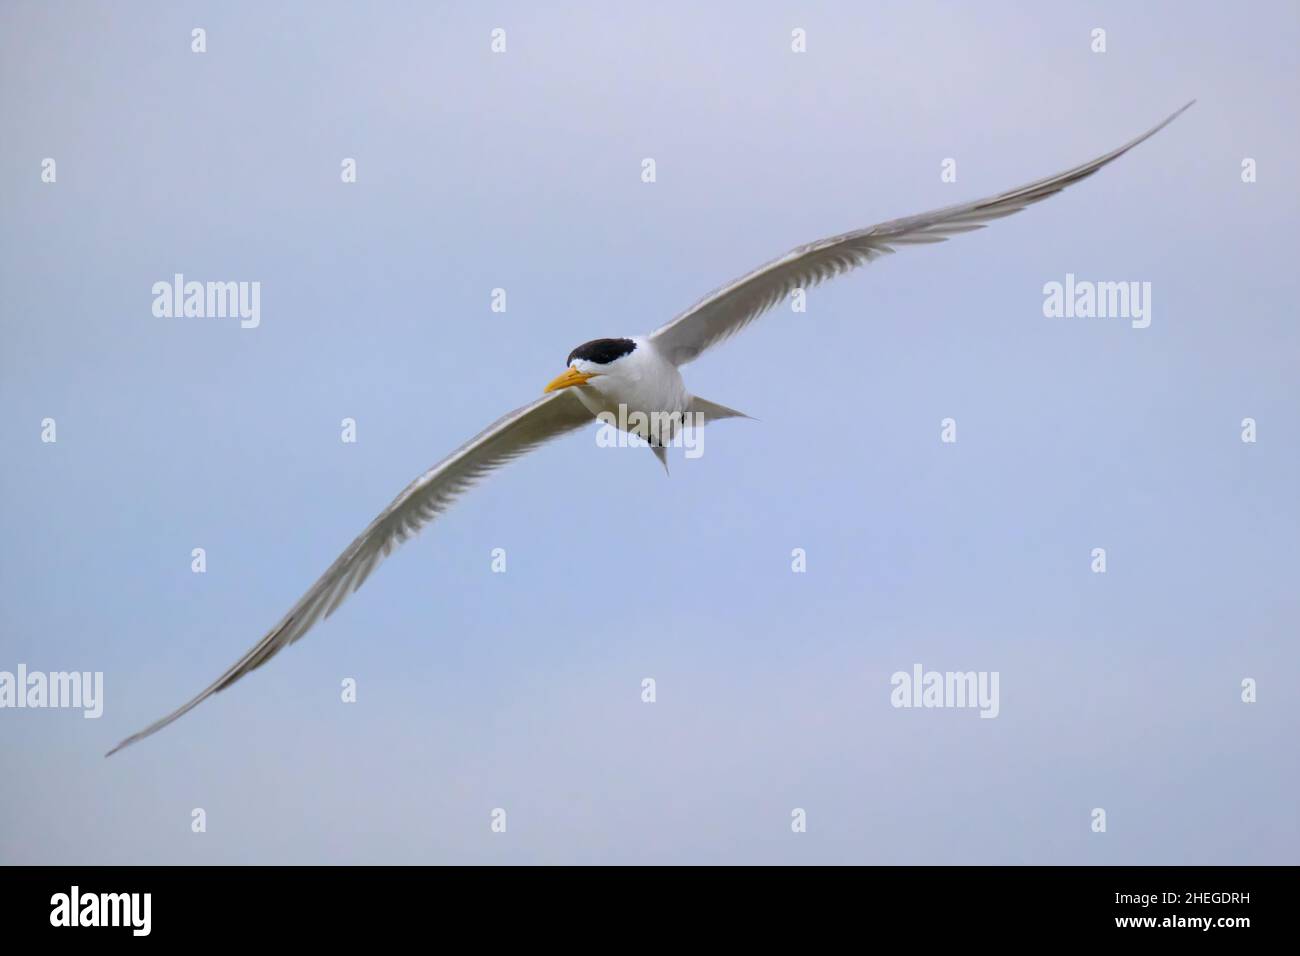 Crested Tern in volo Foto Stock